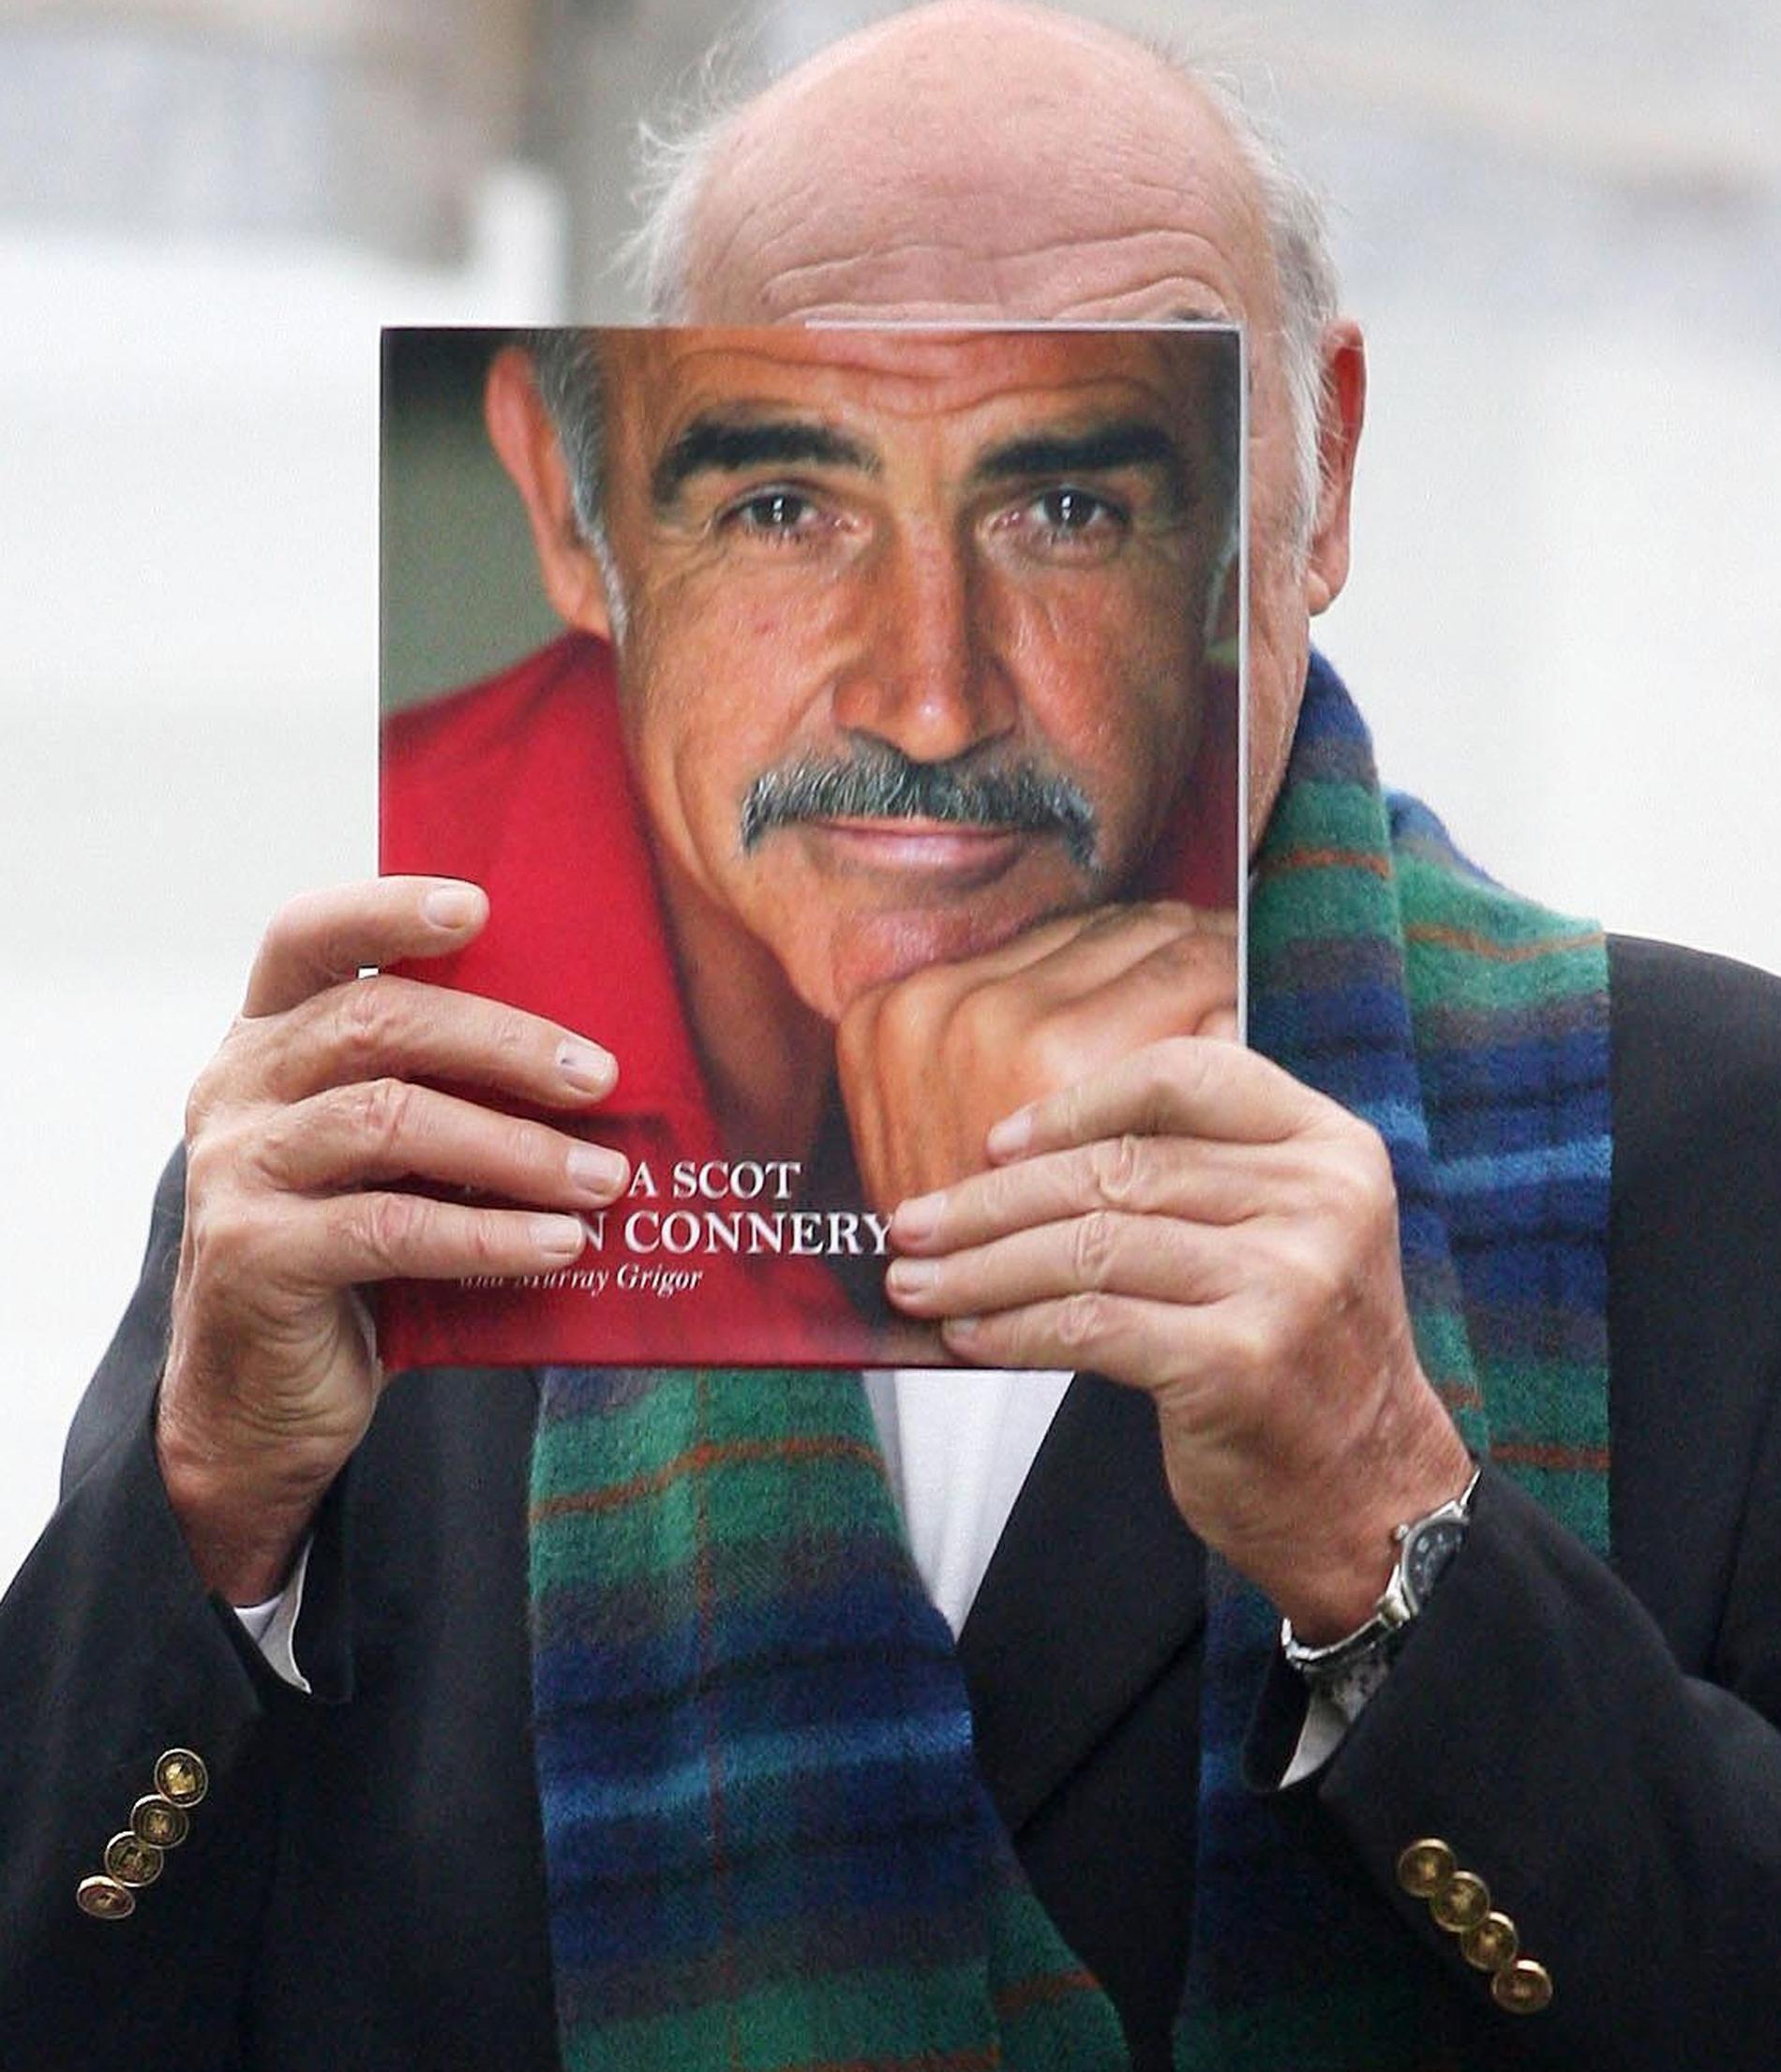 Sean Connery med sin bok ”Being a scot”.